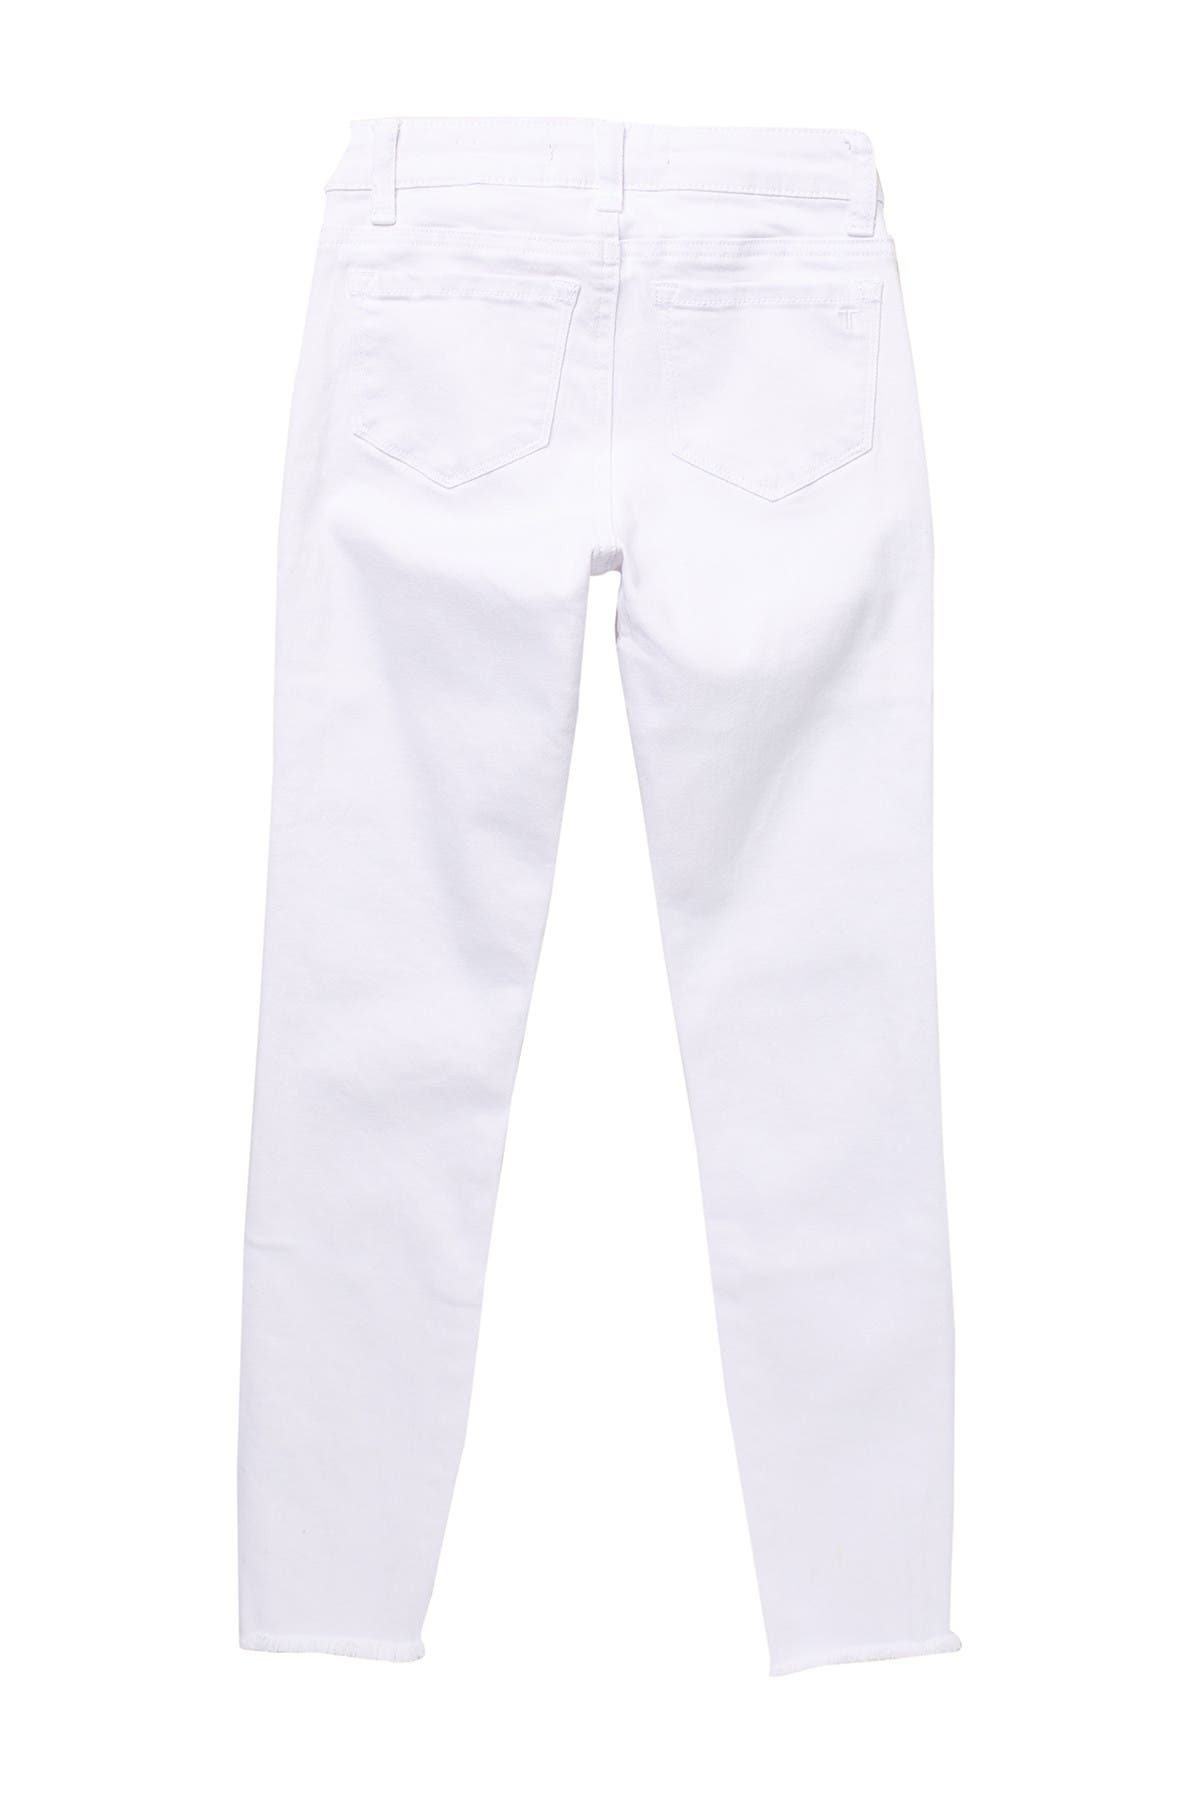 Tractr Kids' 5 Pocket Basic Jeans In Natural